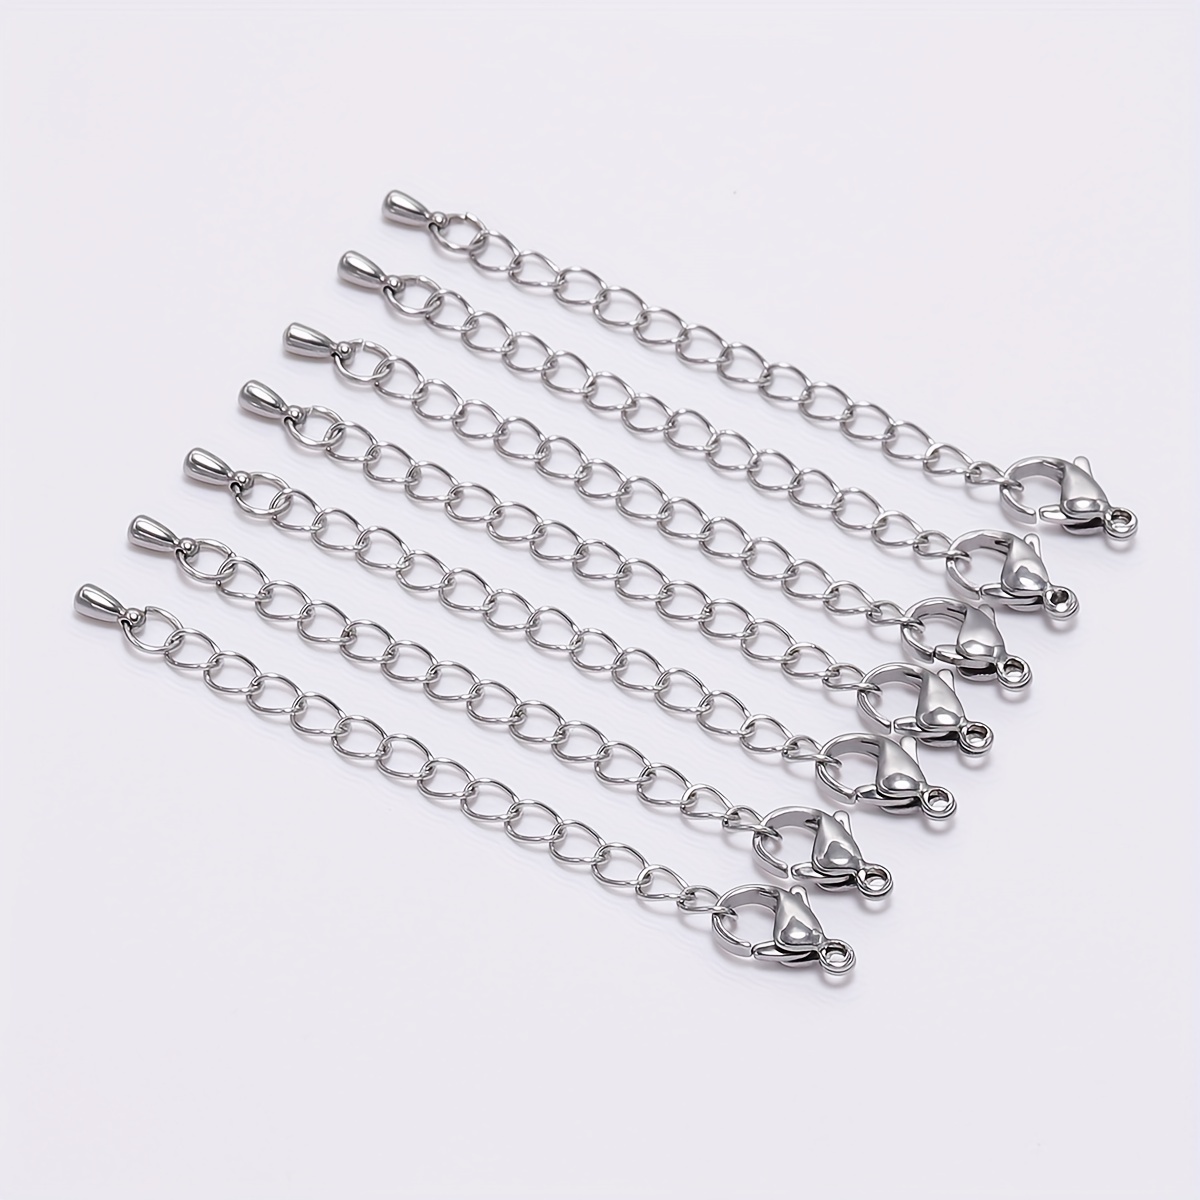 20pcs/lot 70mm Length Necklace Extension Chain with Lobster Clasps for  Bracelet Extended Chains Bulk for DIY Jewelry Making